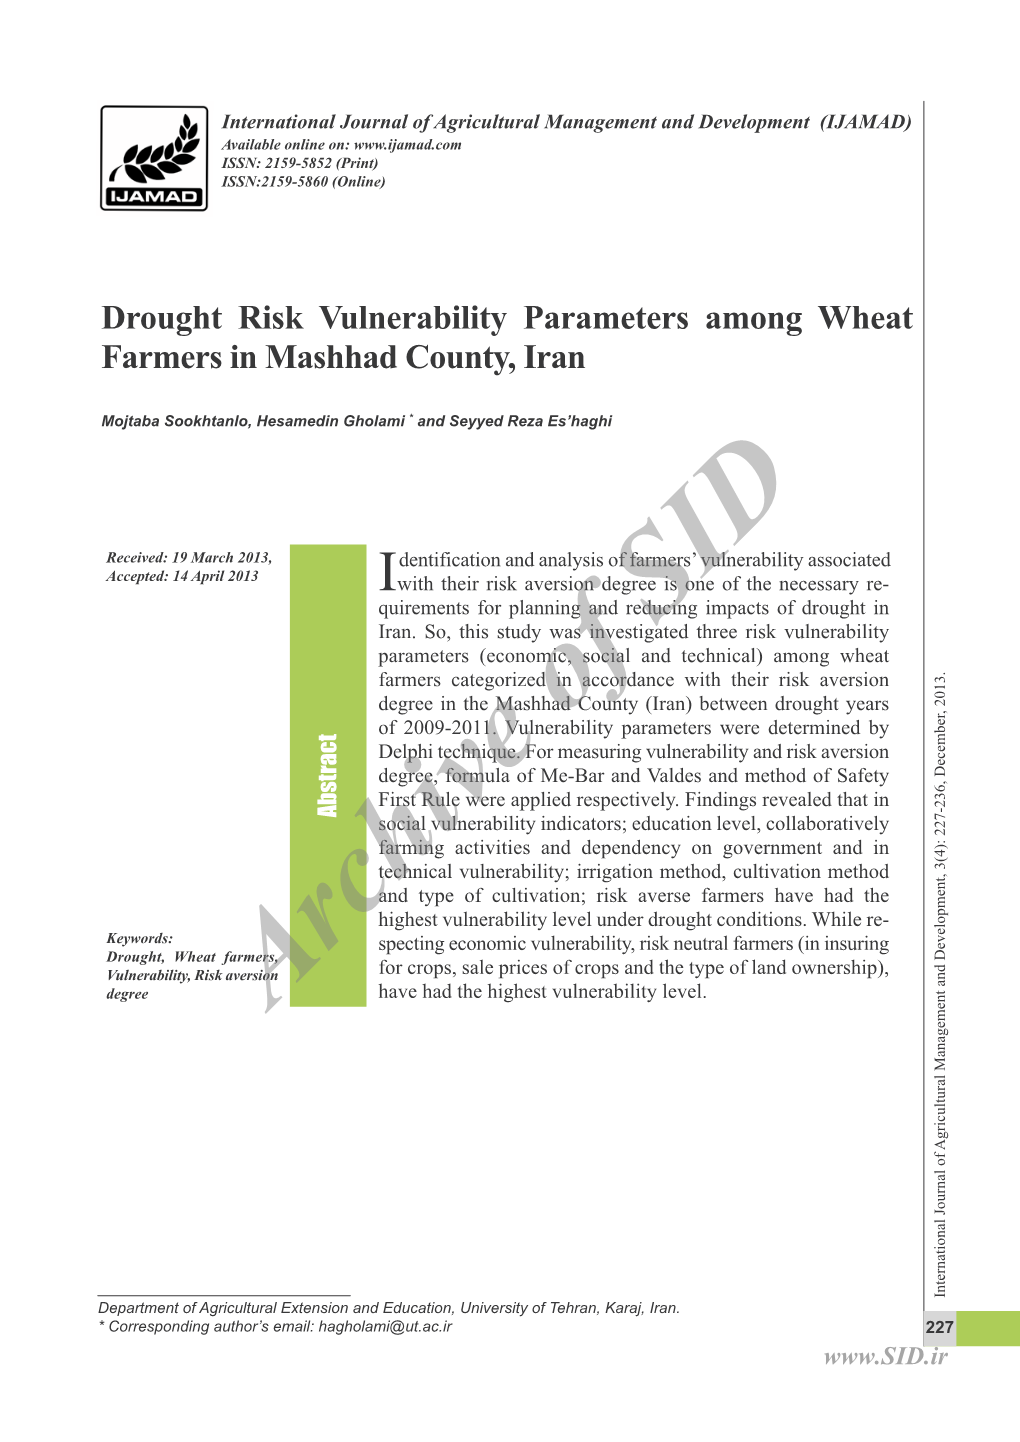 Drought Risk Vulnerability Parameters Among Wheat Farmers in Mashhad